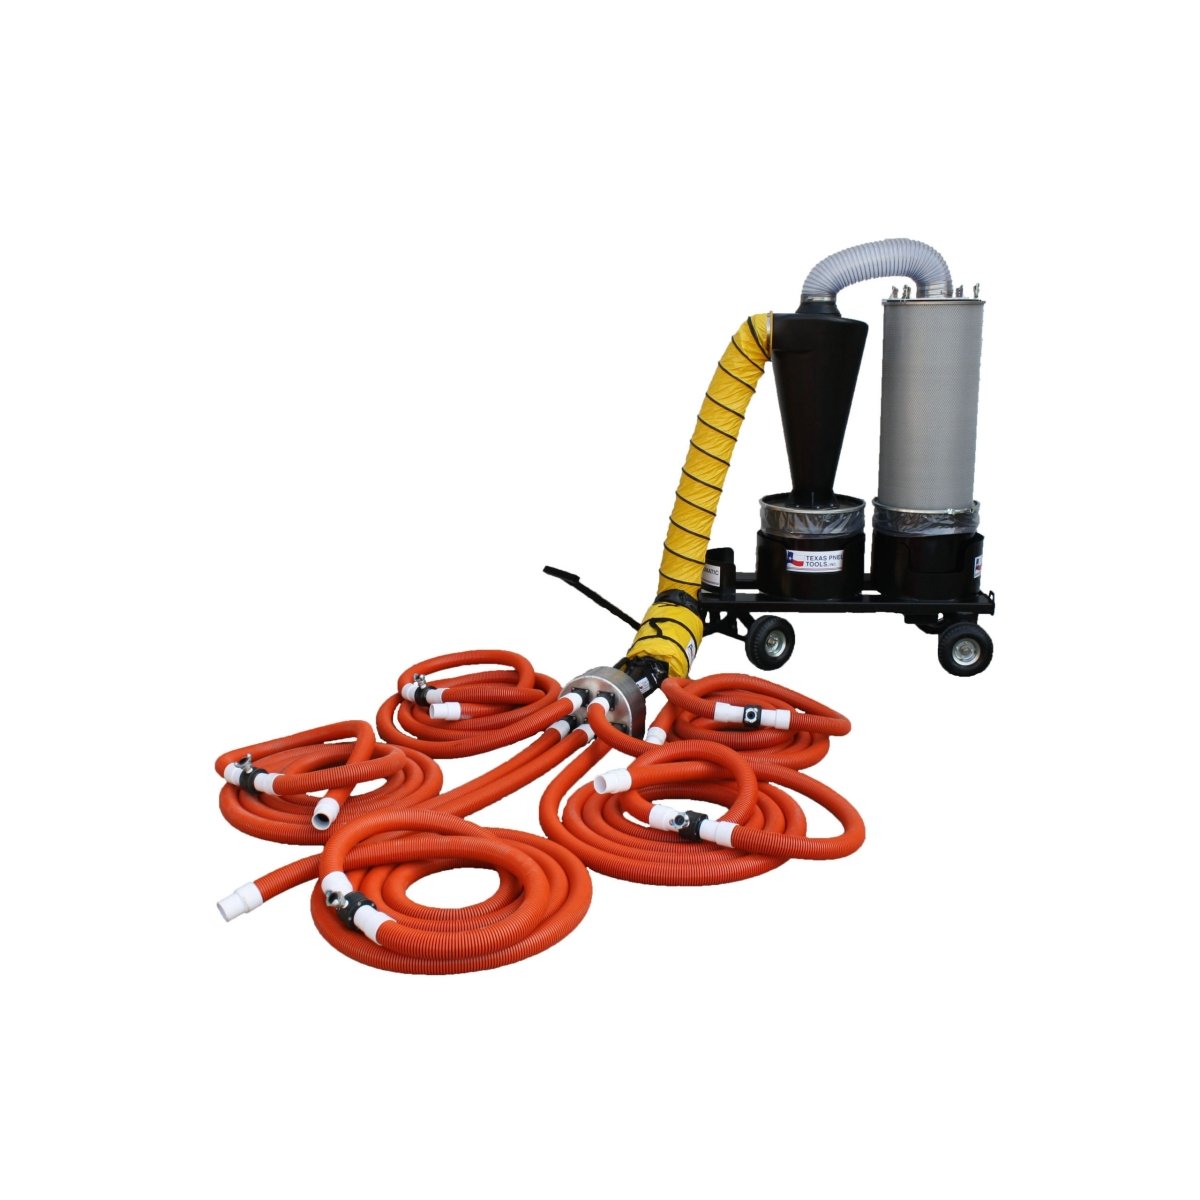 TX-DCS-MU5 - 5 Way, Multi-User, Portable Dust Collection System - Texas Pneumatic Tools